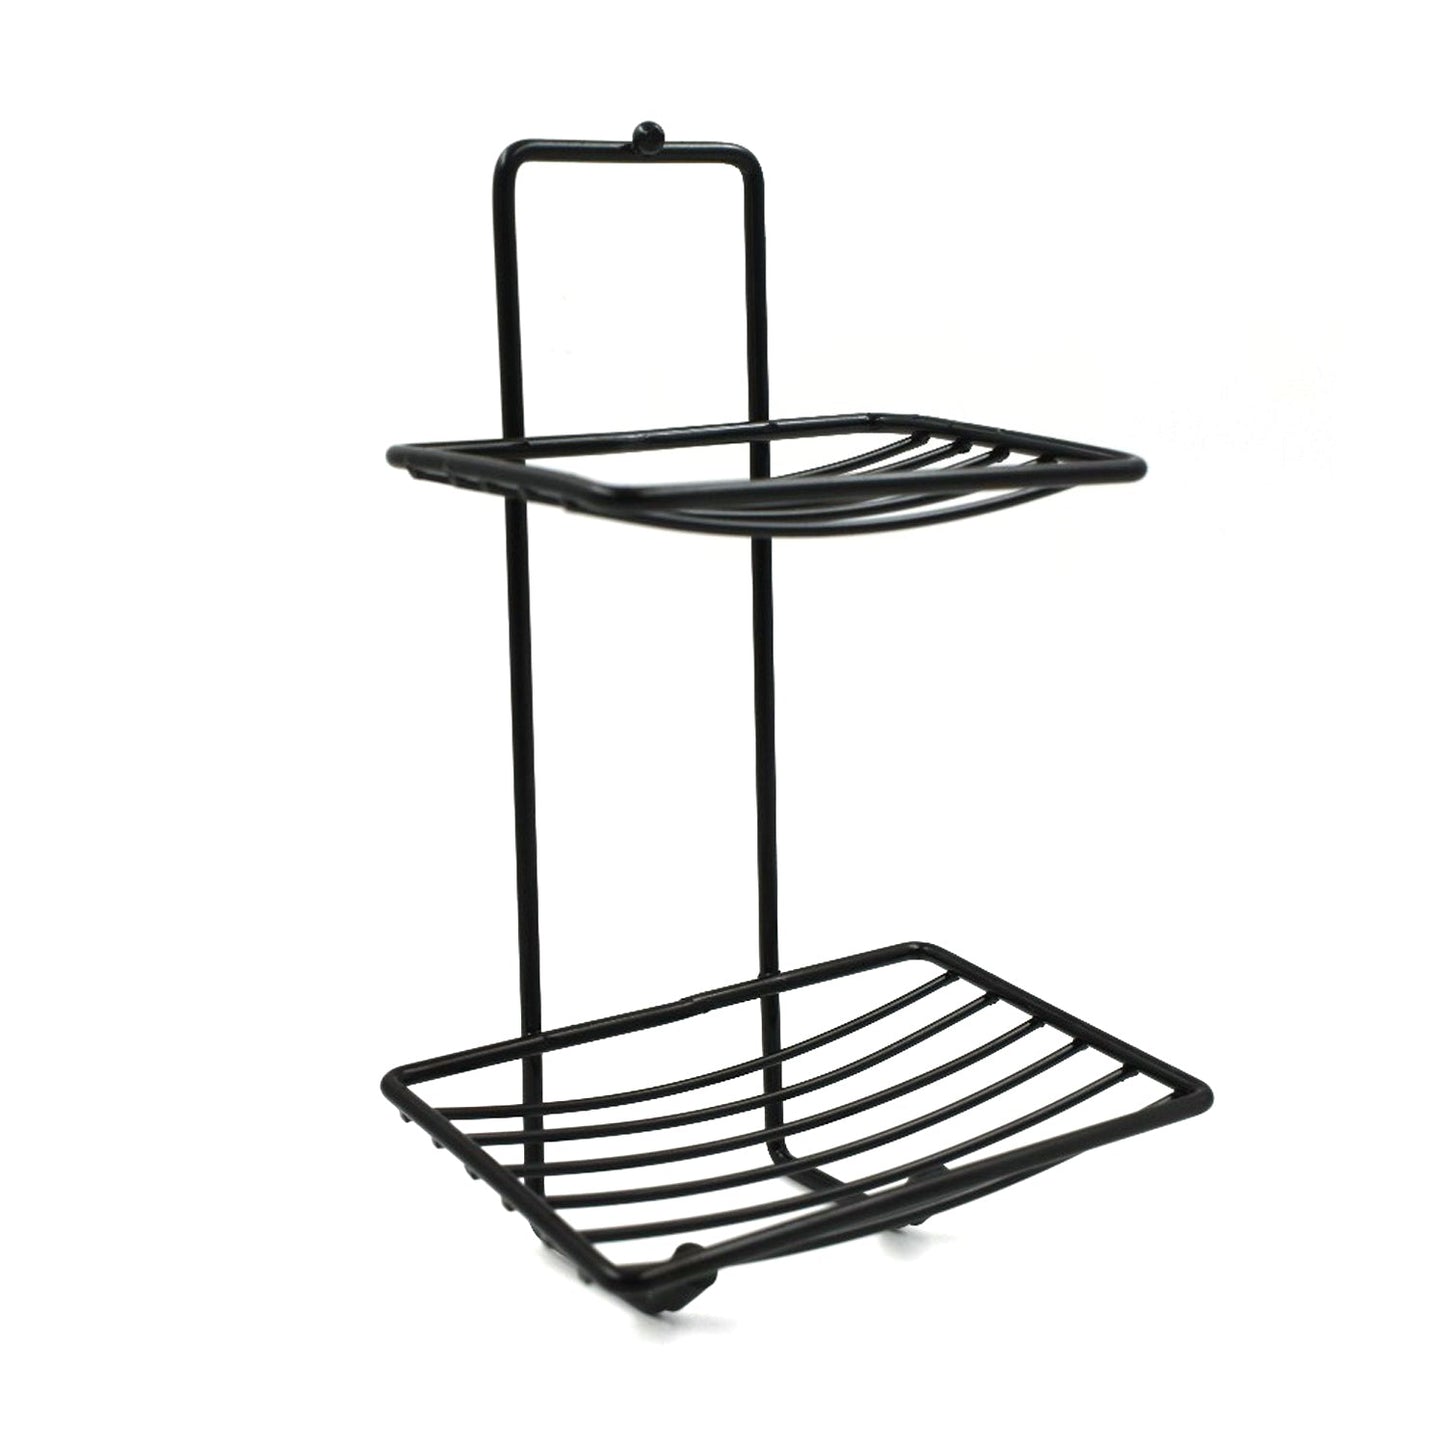 1763A 2 Layer SS Soap Rack used in all kinds of places household and bathroom purposes for holding soaps. - SWASTIK CREATIONS The Trend Point SWASTIK CREATIONS The Trend Point